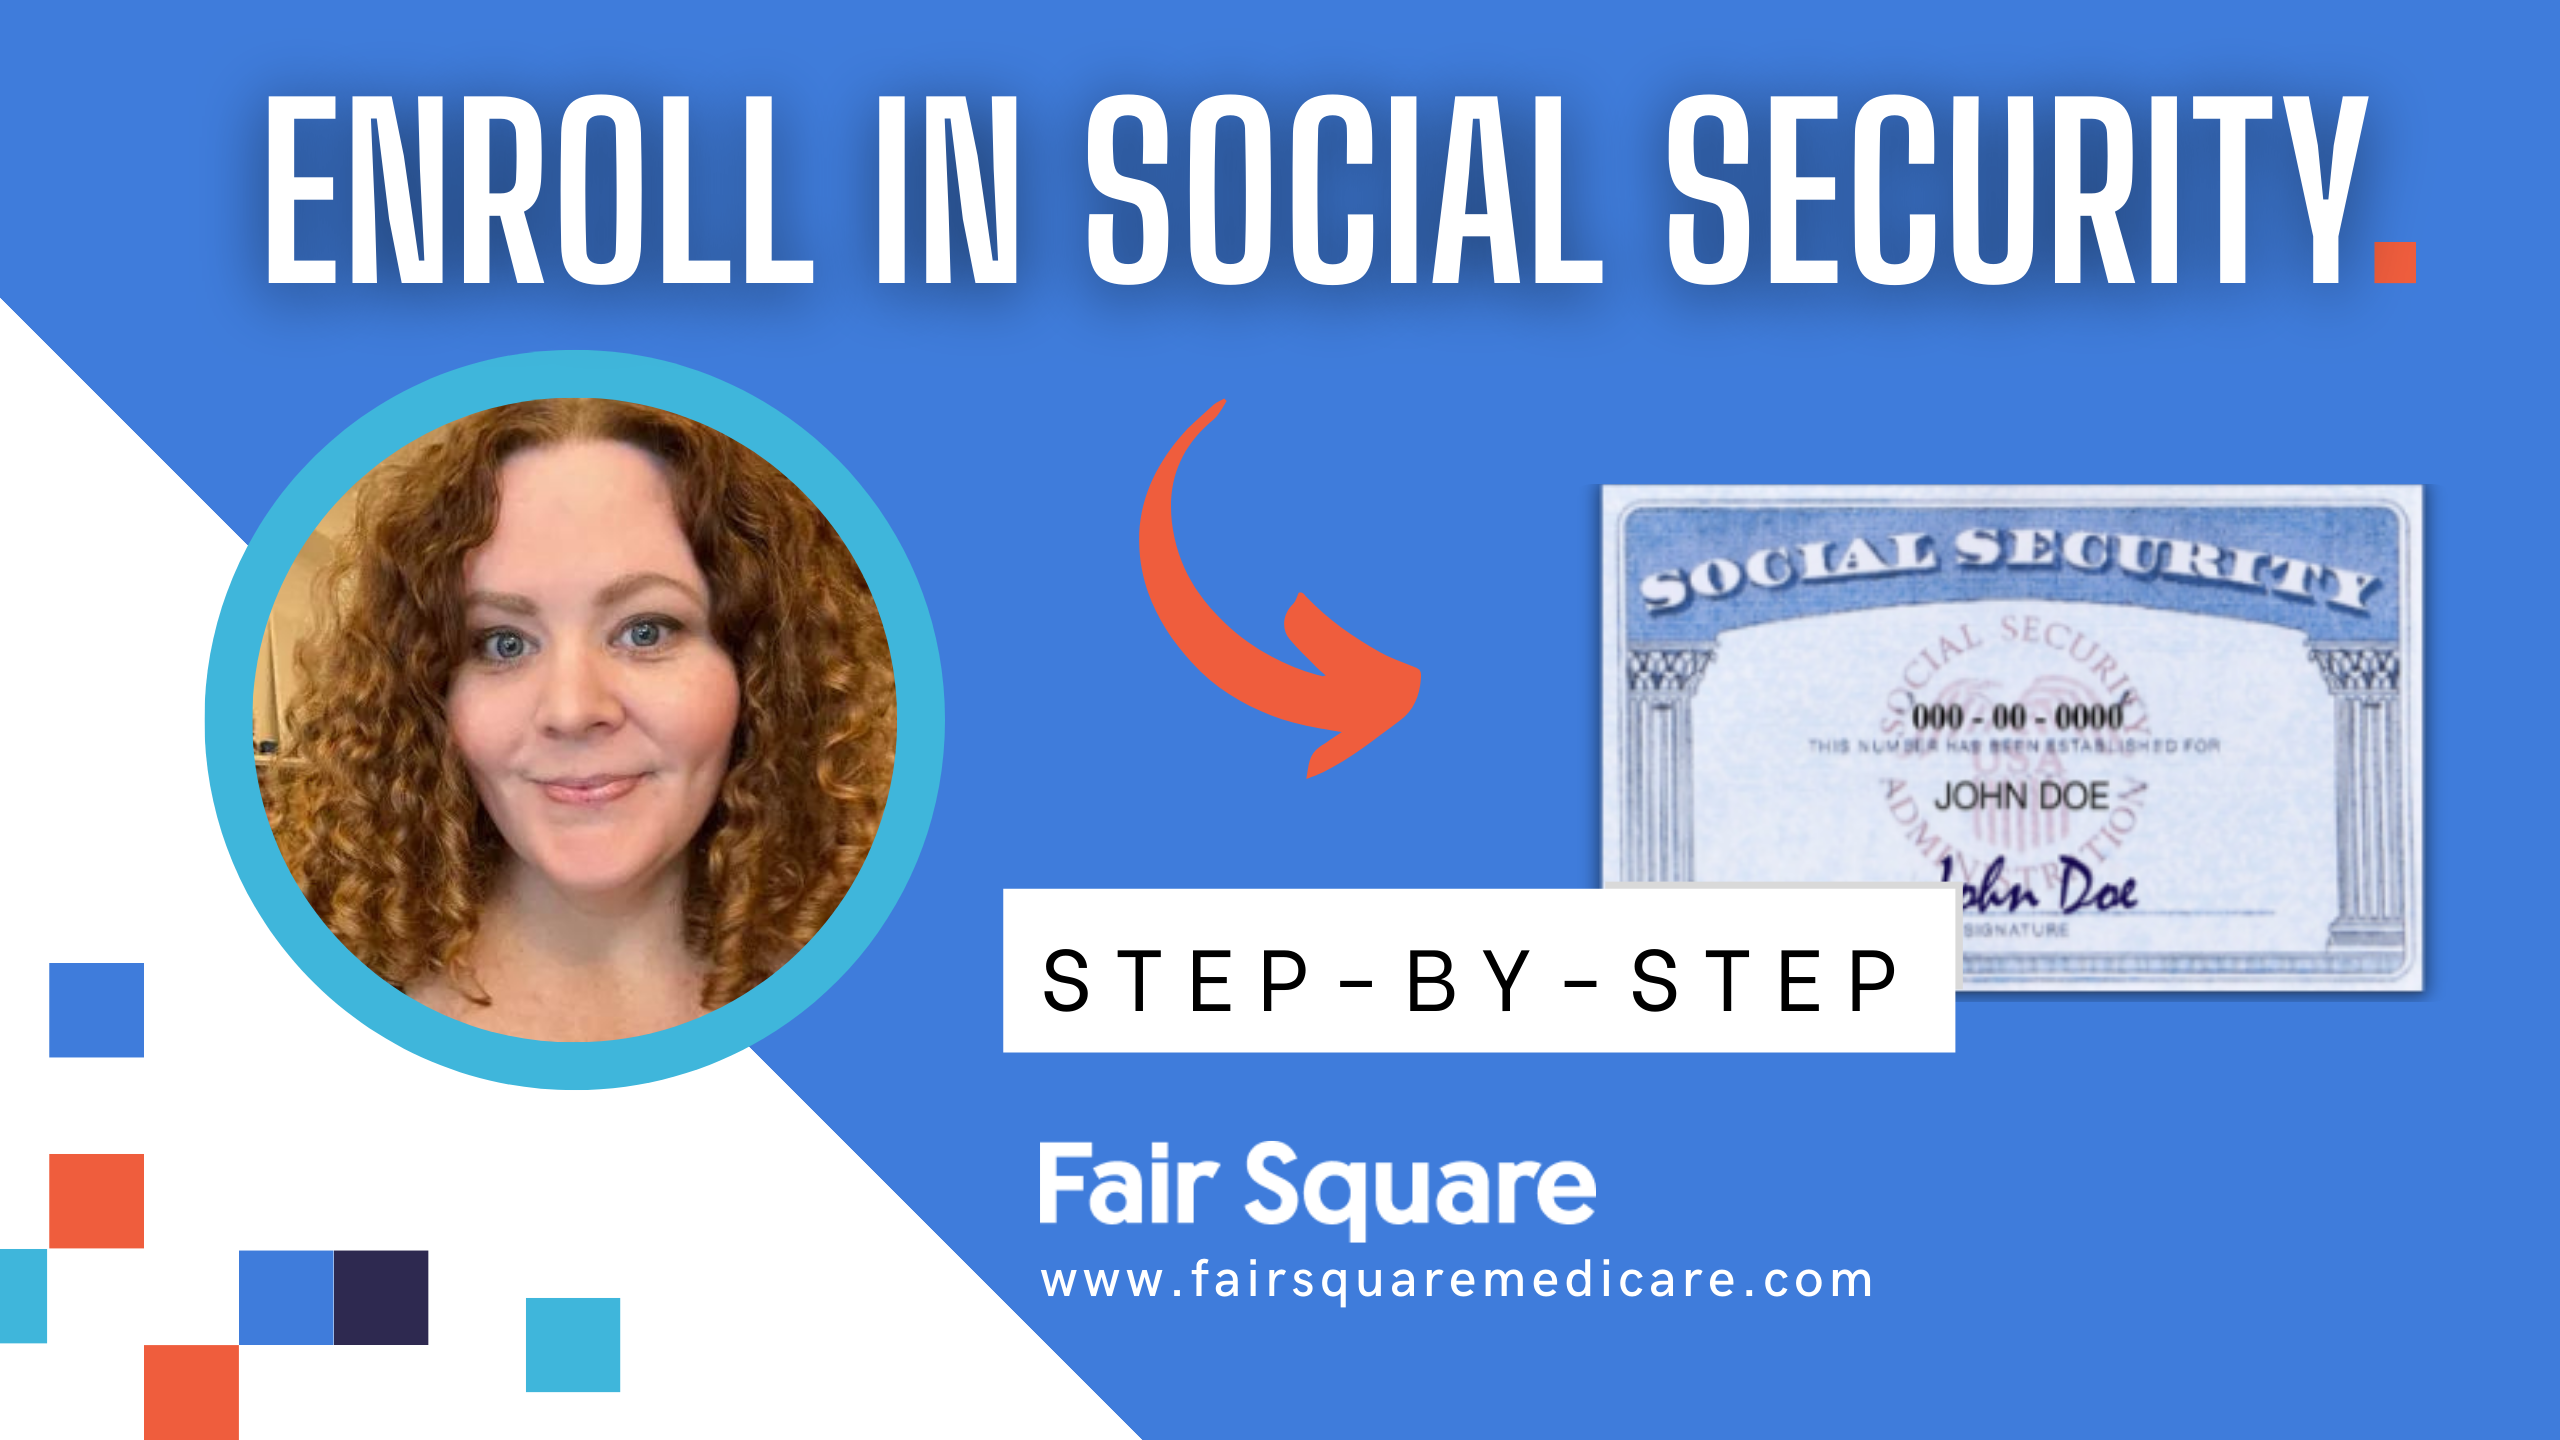 Enroll in Social Security step-by-step with the help of Fair Square stock image